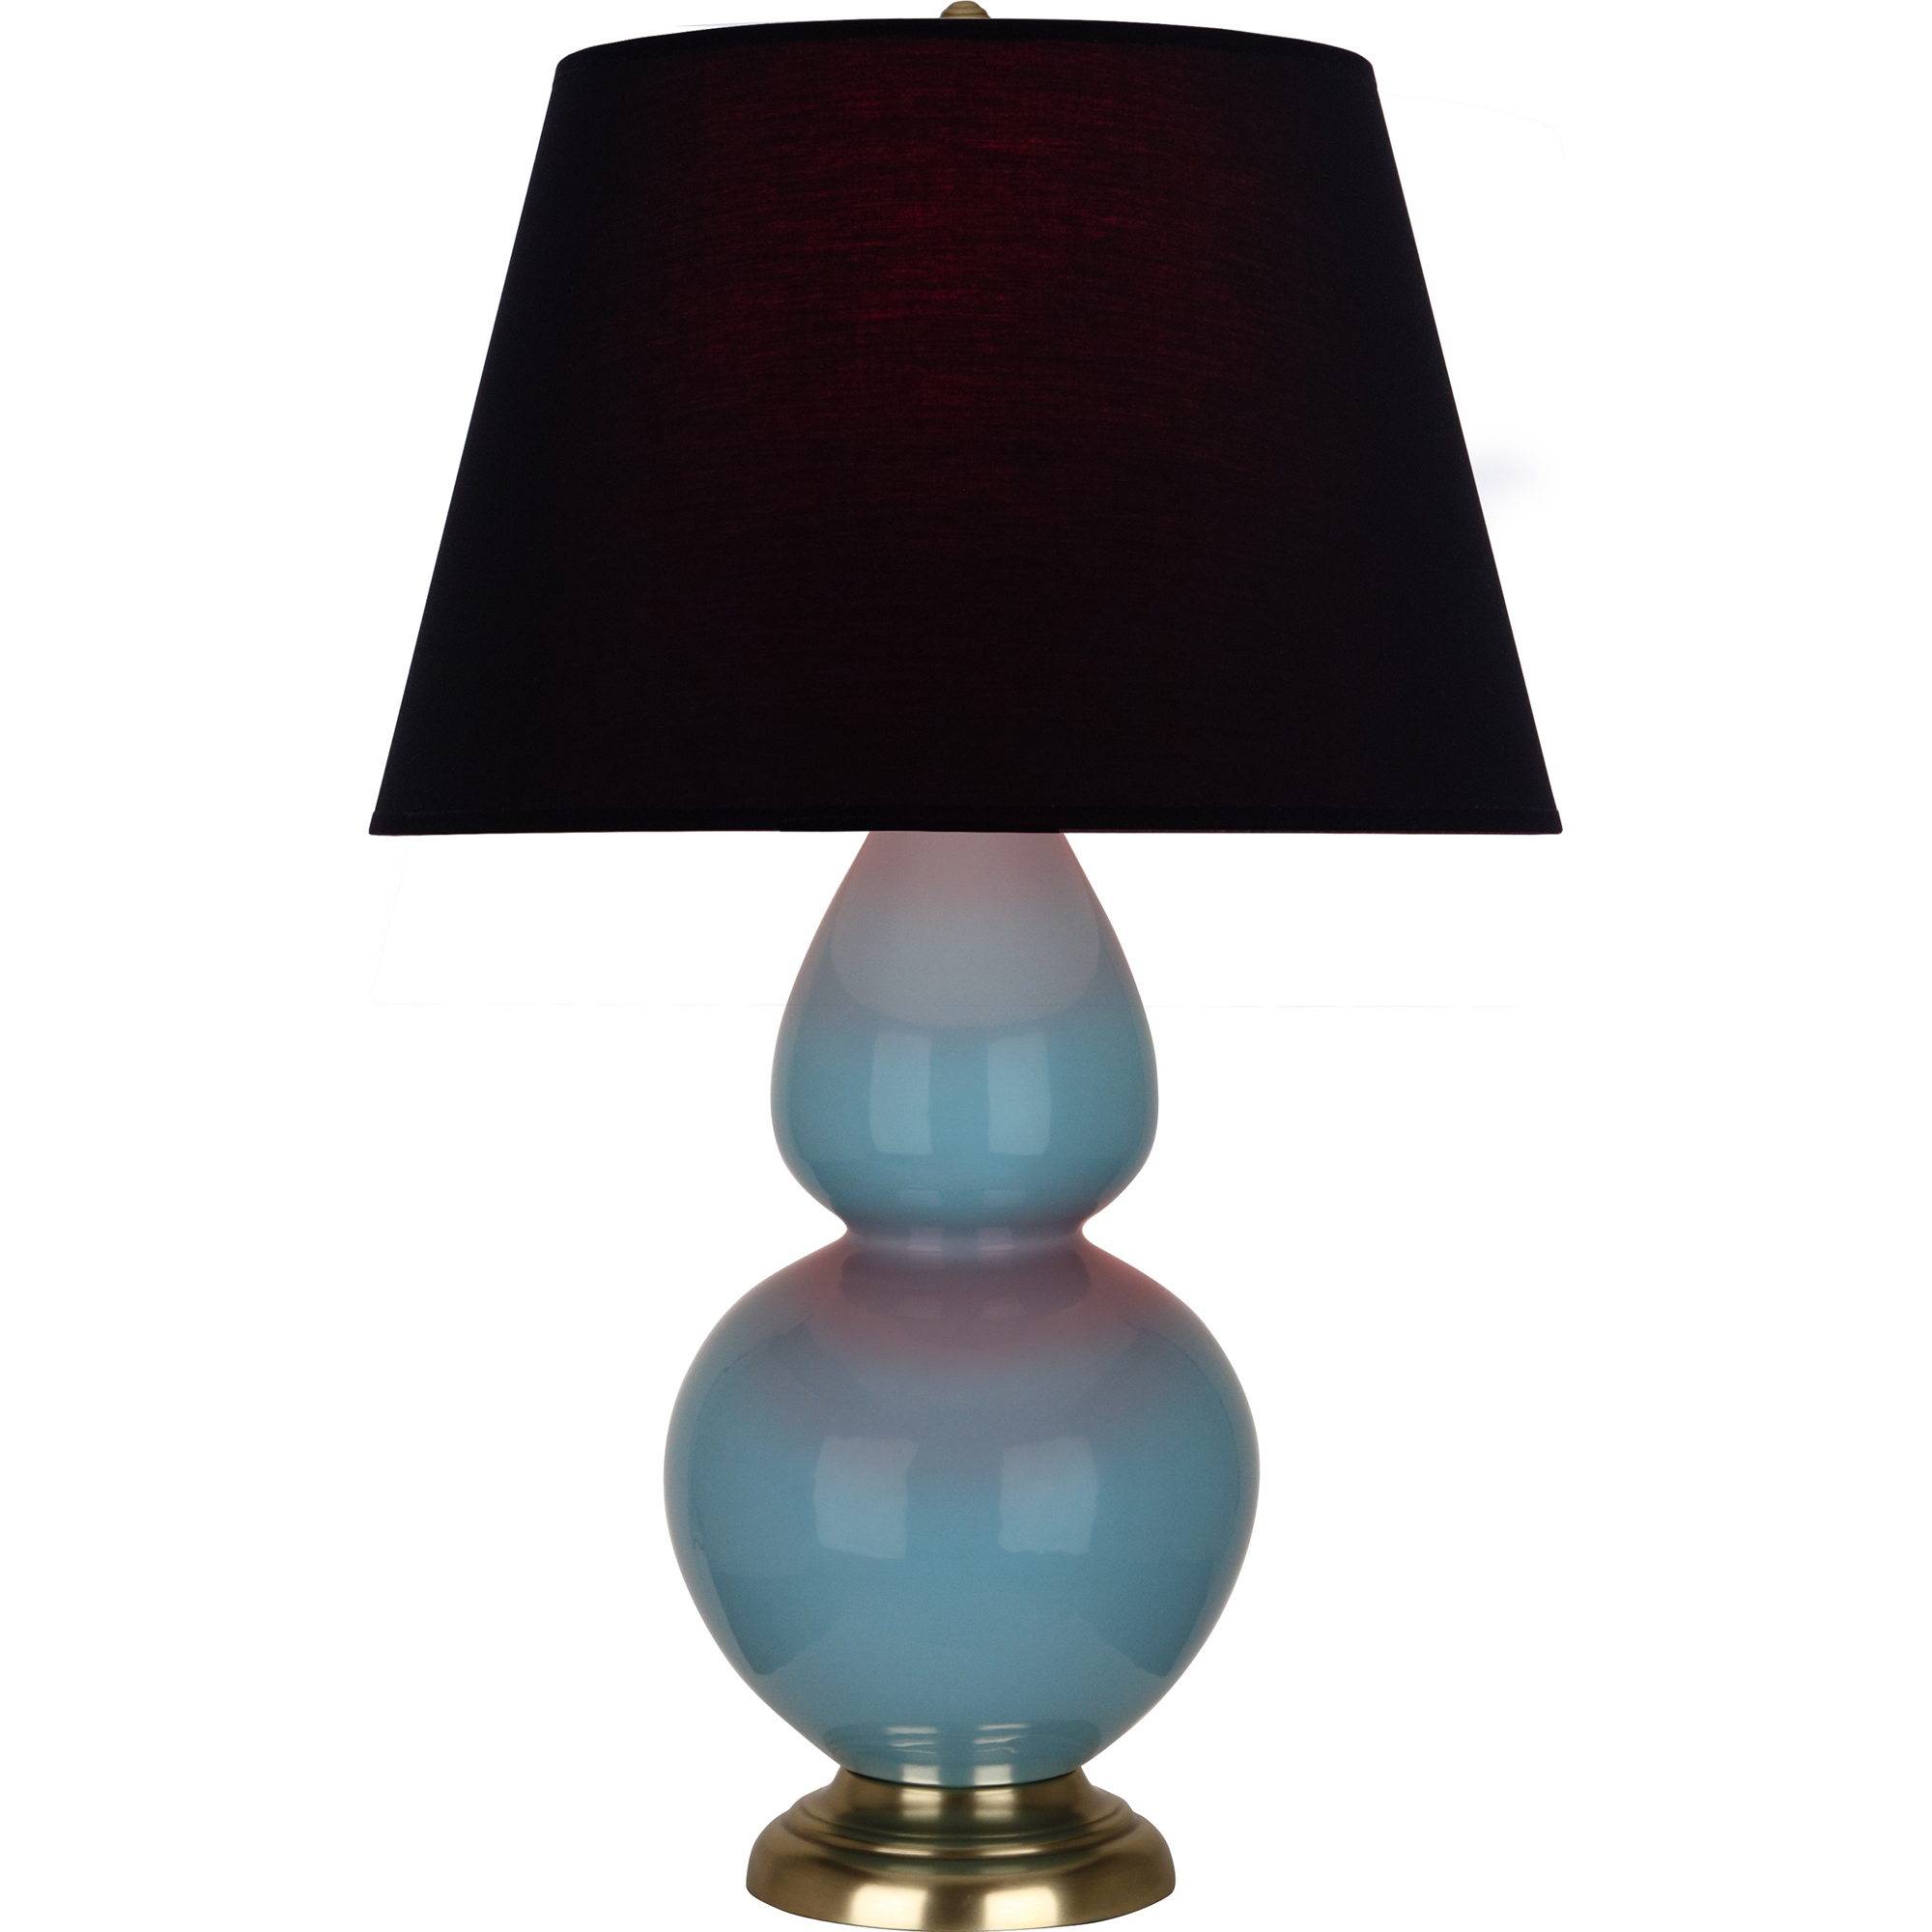 Double Gourd Table Lamp Style #OB20K